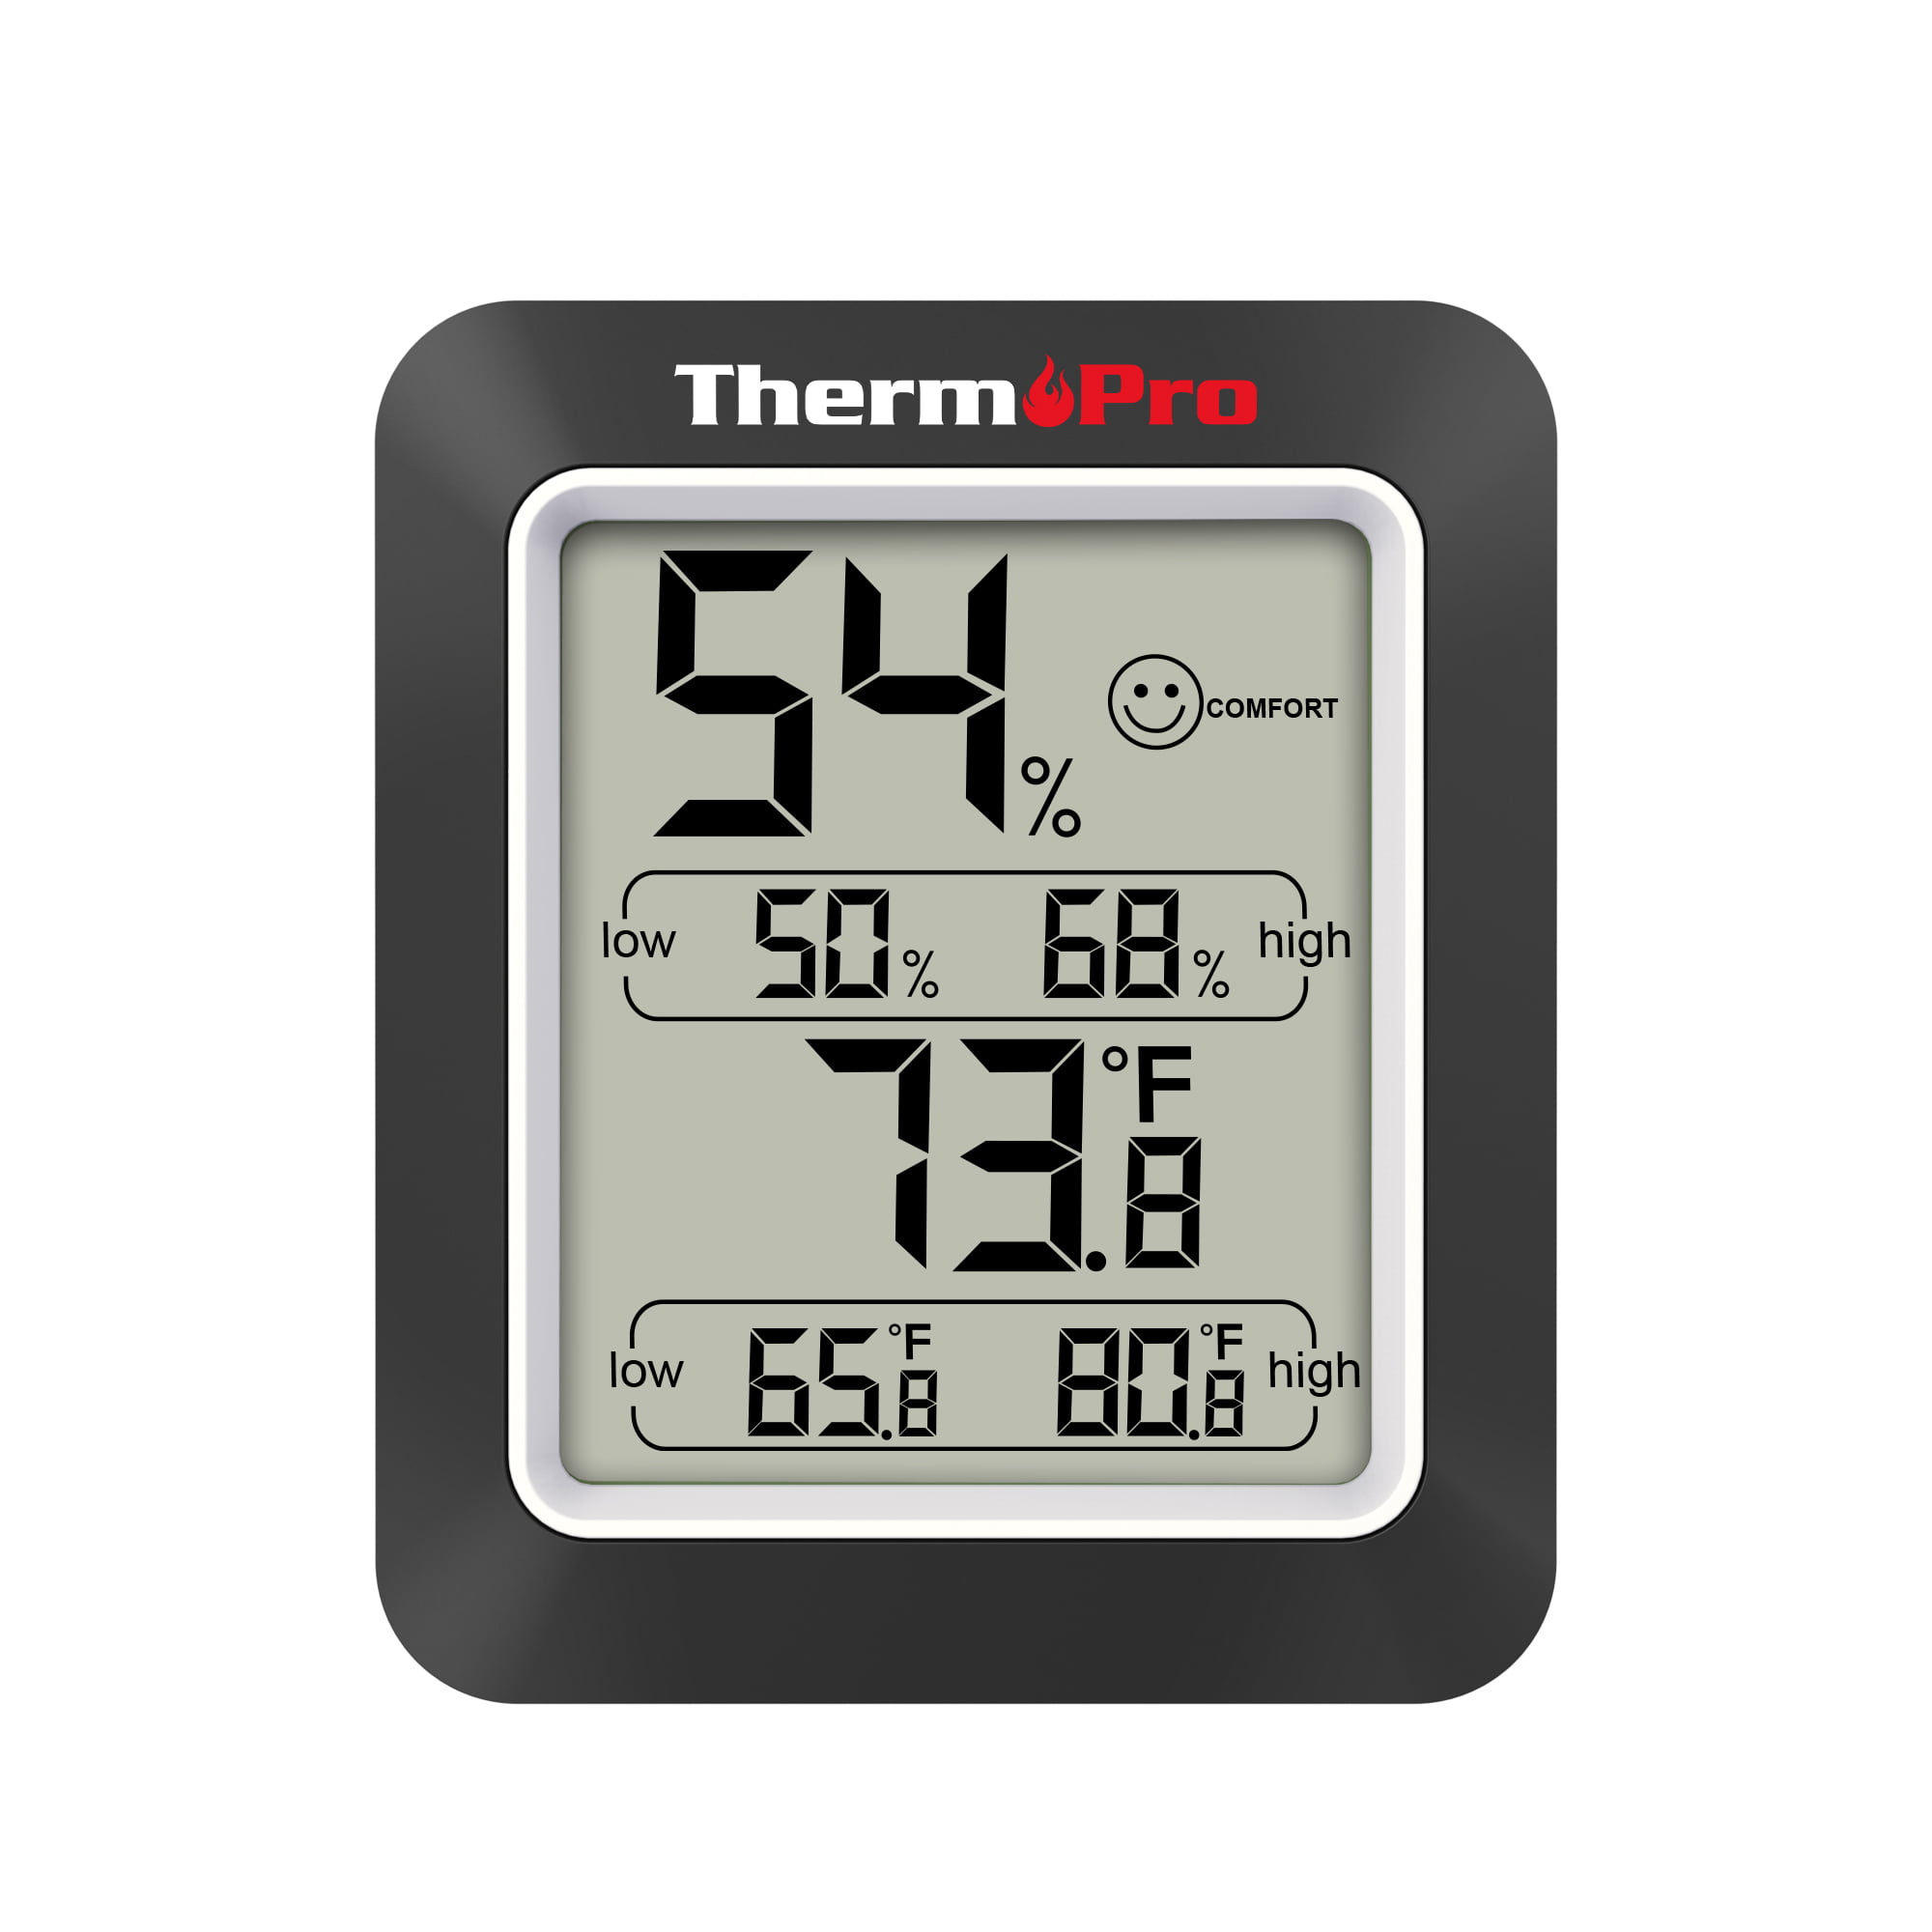 ThermoPro TP50 Indoor thermometer Humidity Monitor Weather Station wit –  Prikone